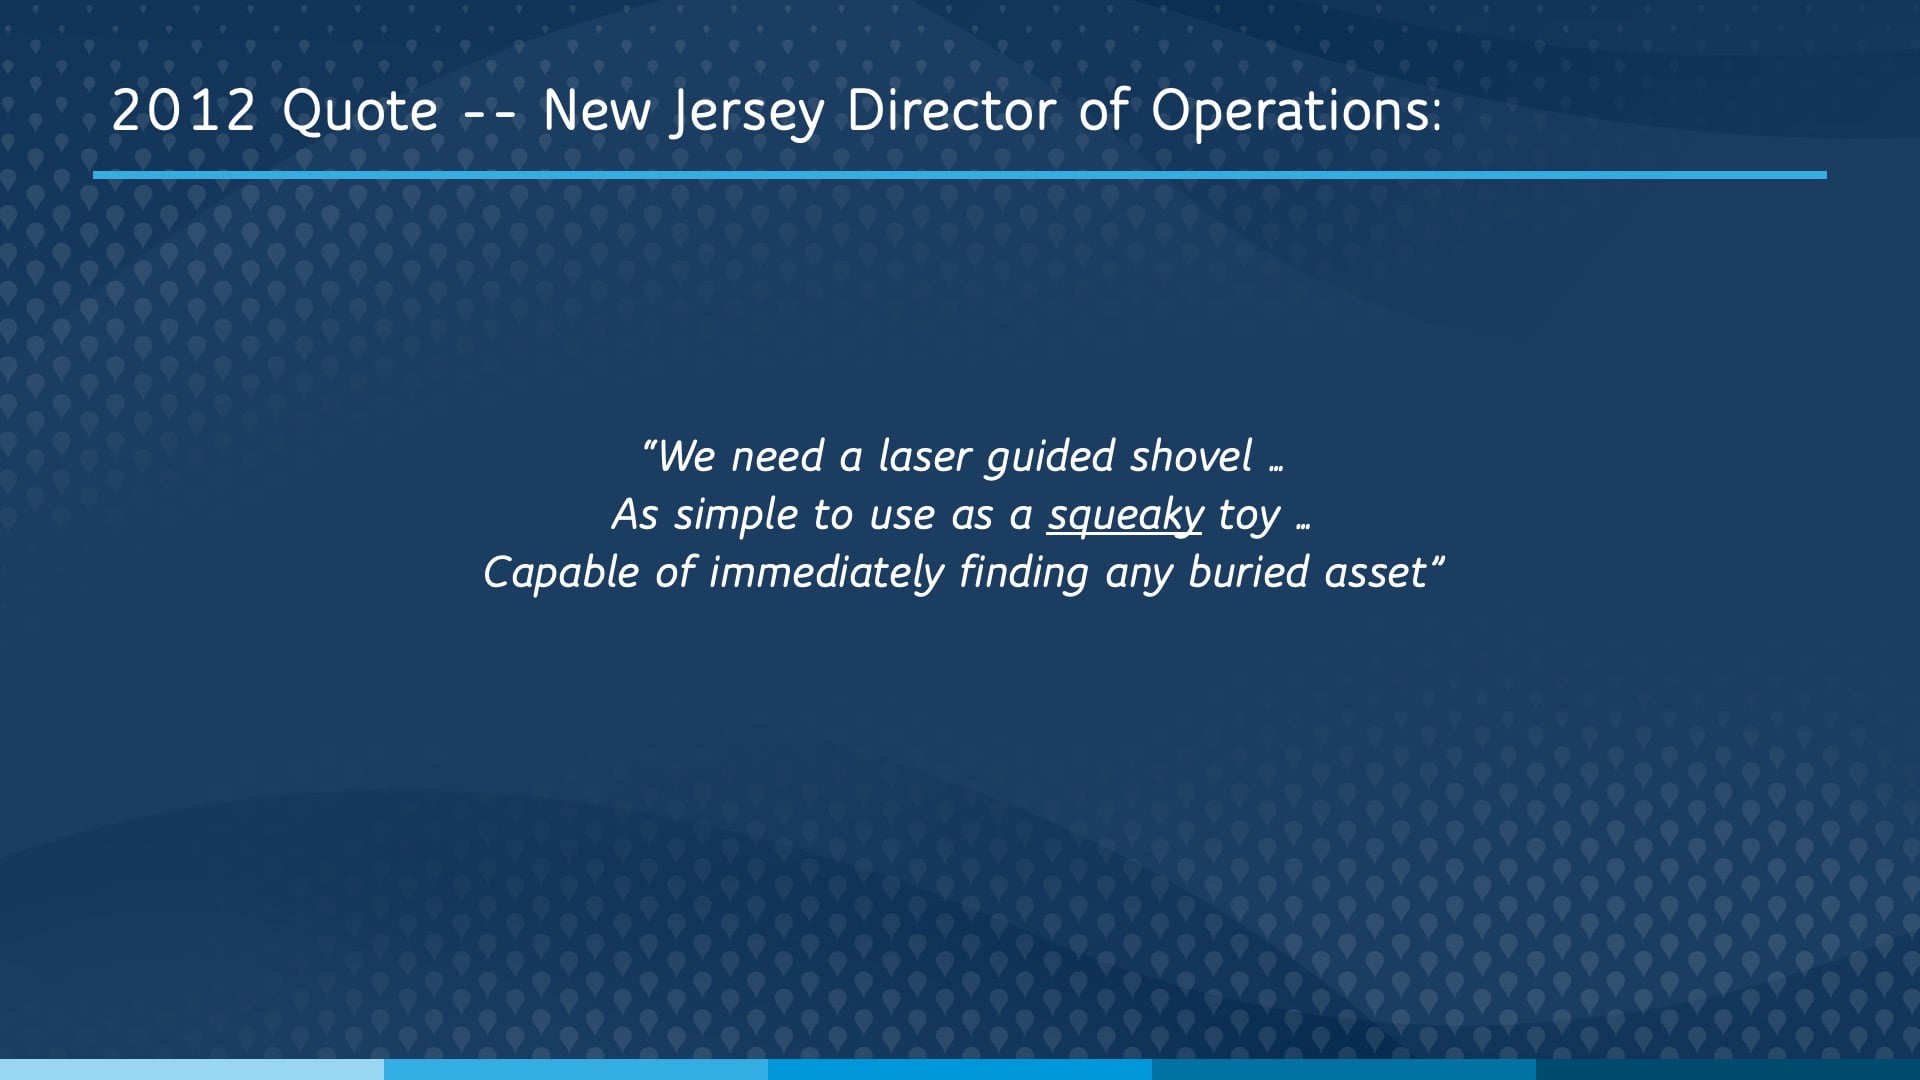 American Water Esri UC Presentation: New Jersey AmWater Quote